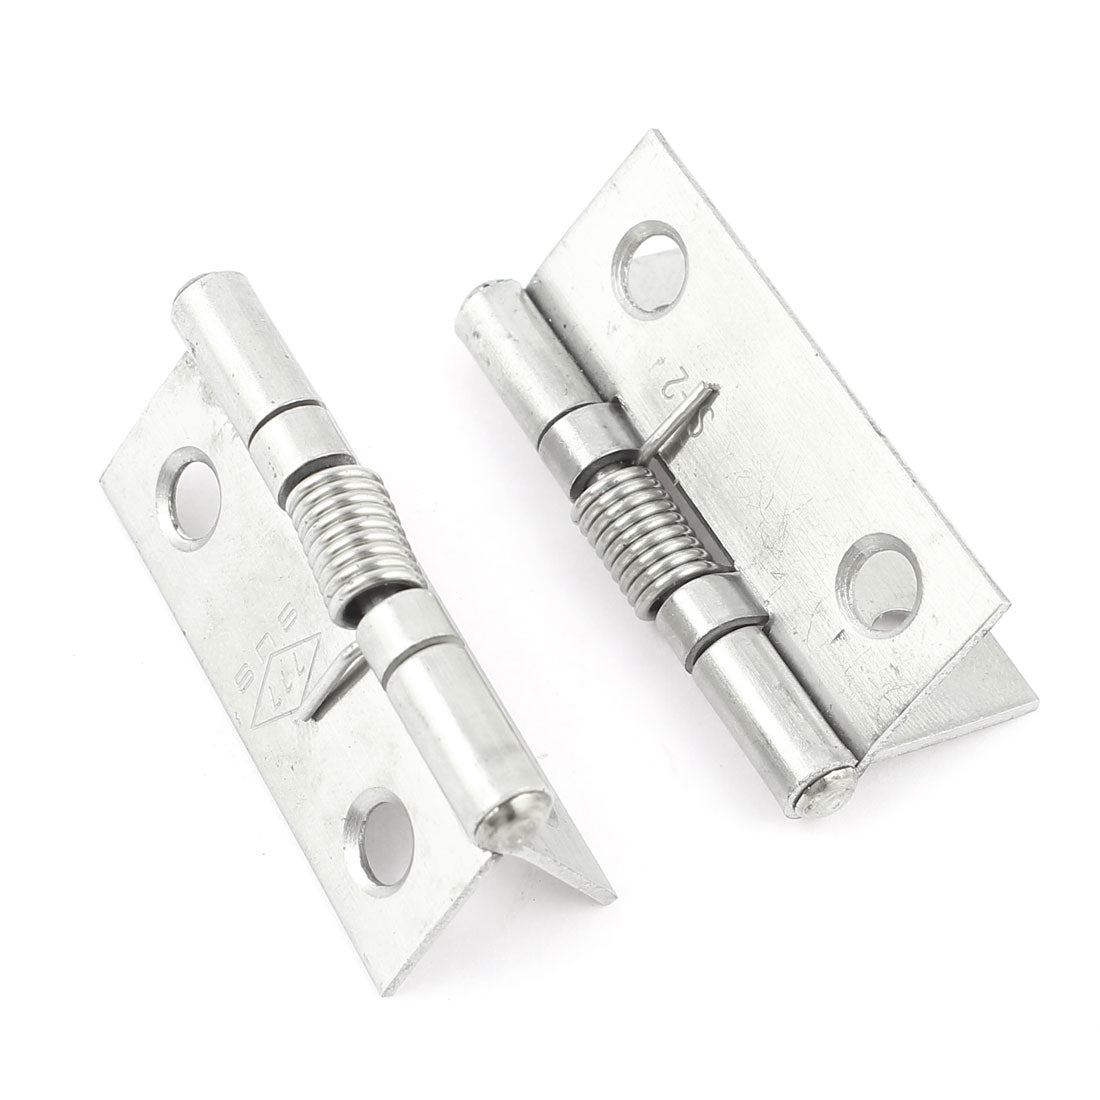 uxcell Uxcell 2pcs Spring Loaded Silver Tone Metal Window Cabinets Door Hinges Hardware 1.5"